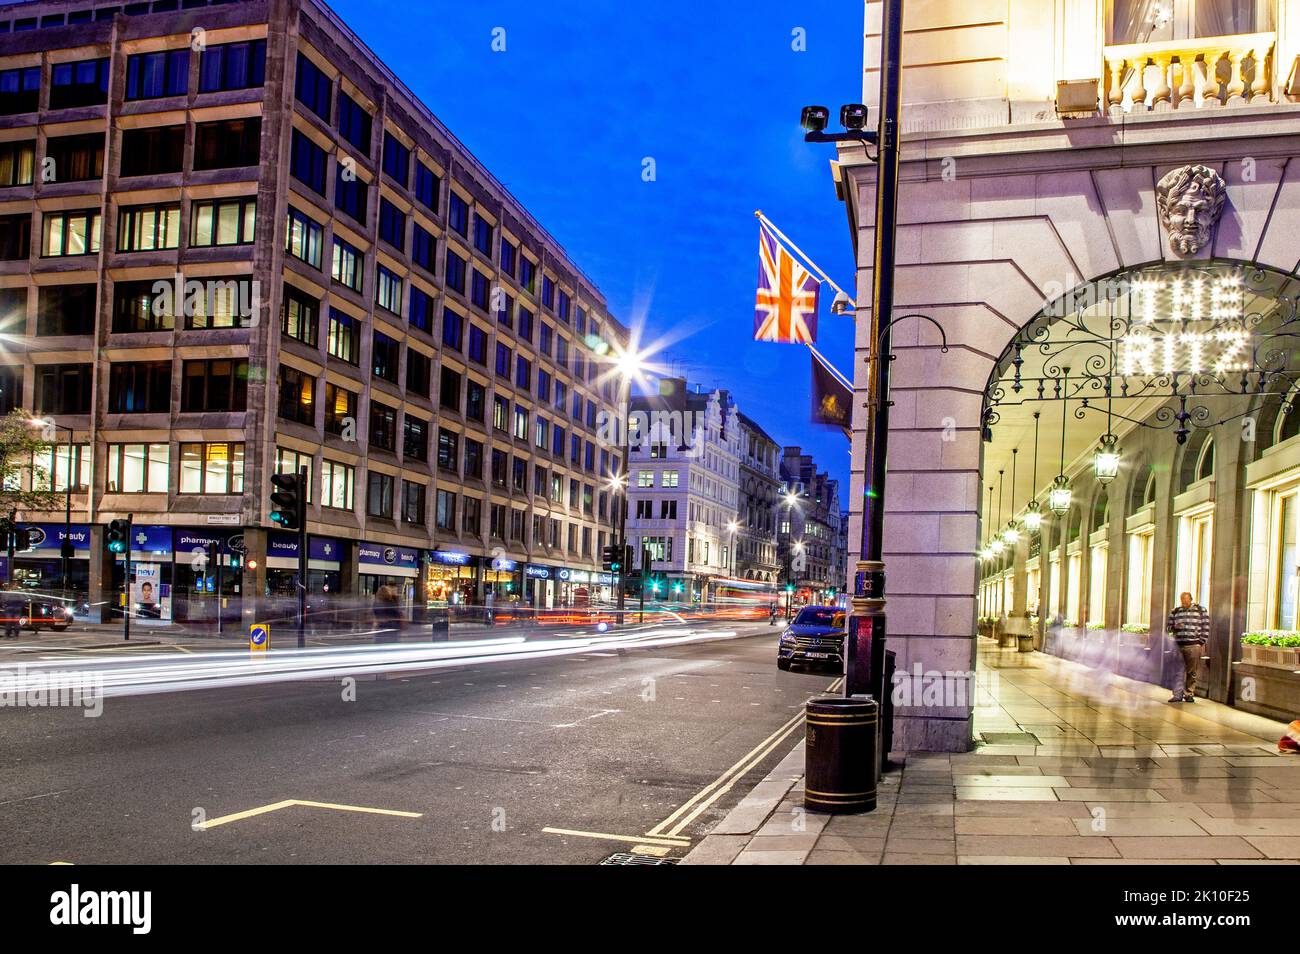 The Ritz At Night in Piccadilly London UK Stock Photo